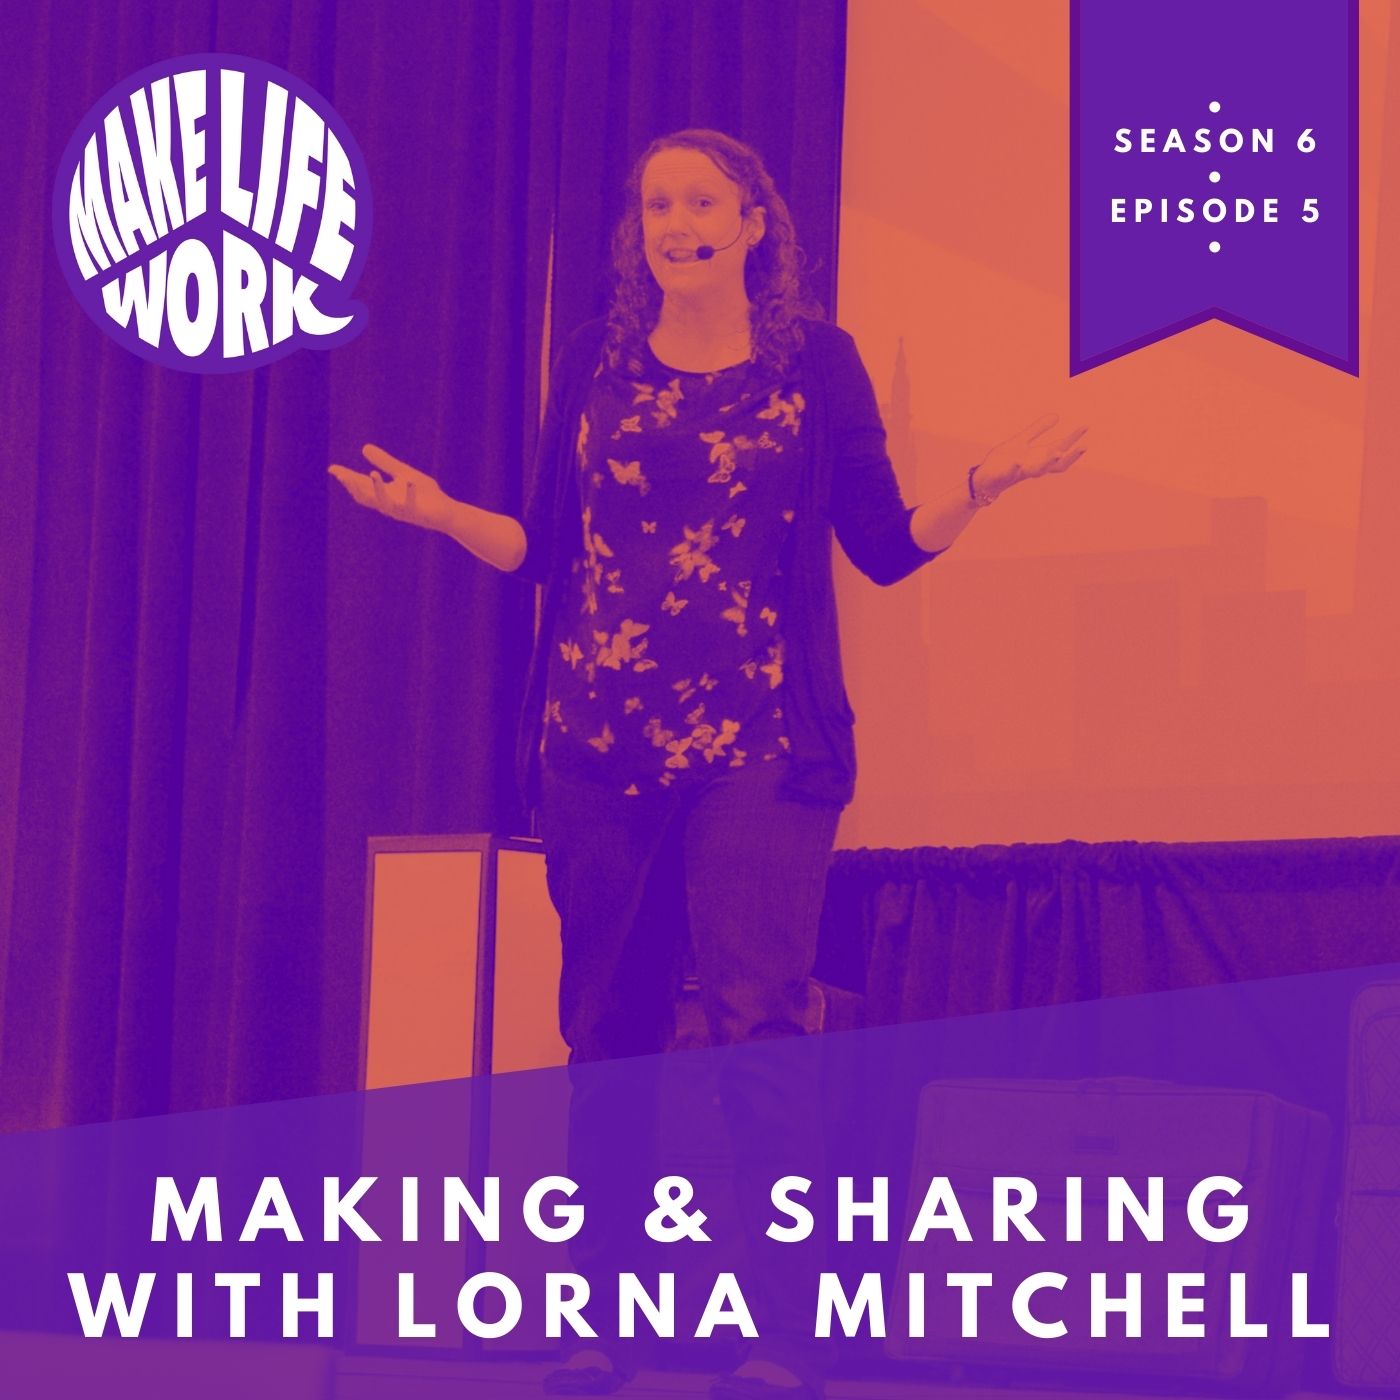 Making & sharing with Lorna Mitchell